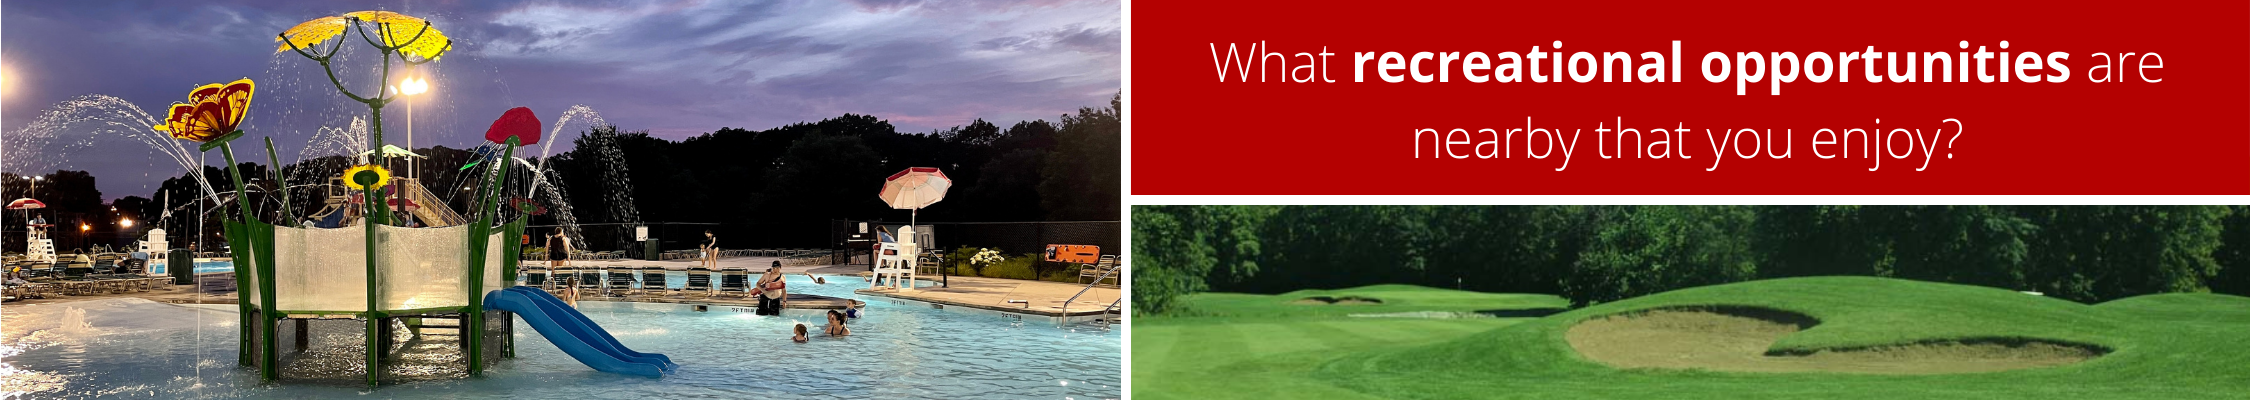 What recreational opportunities are nearby?